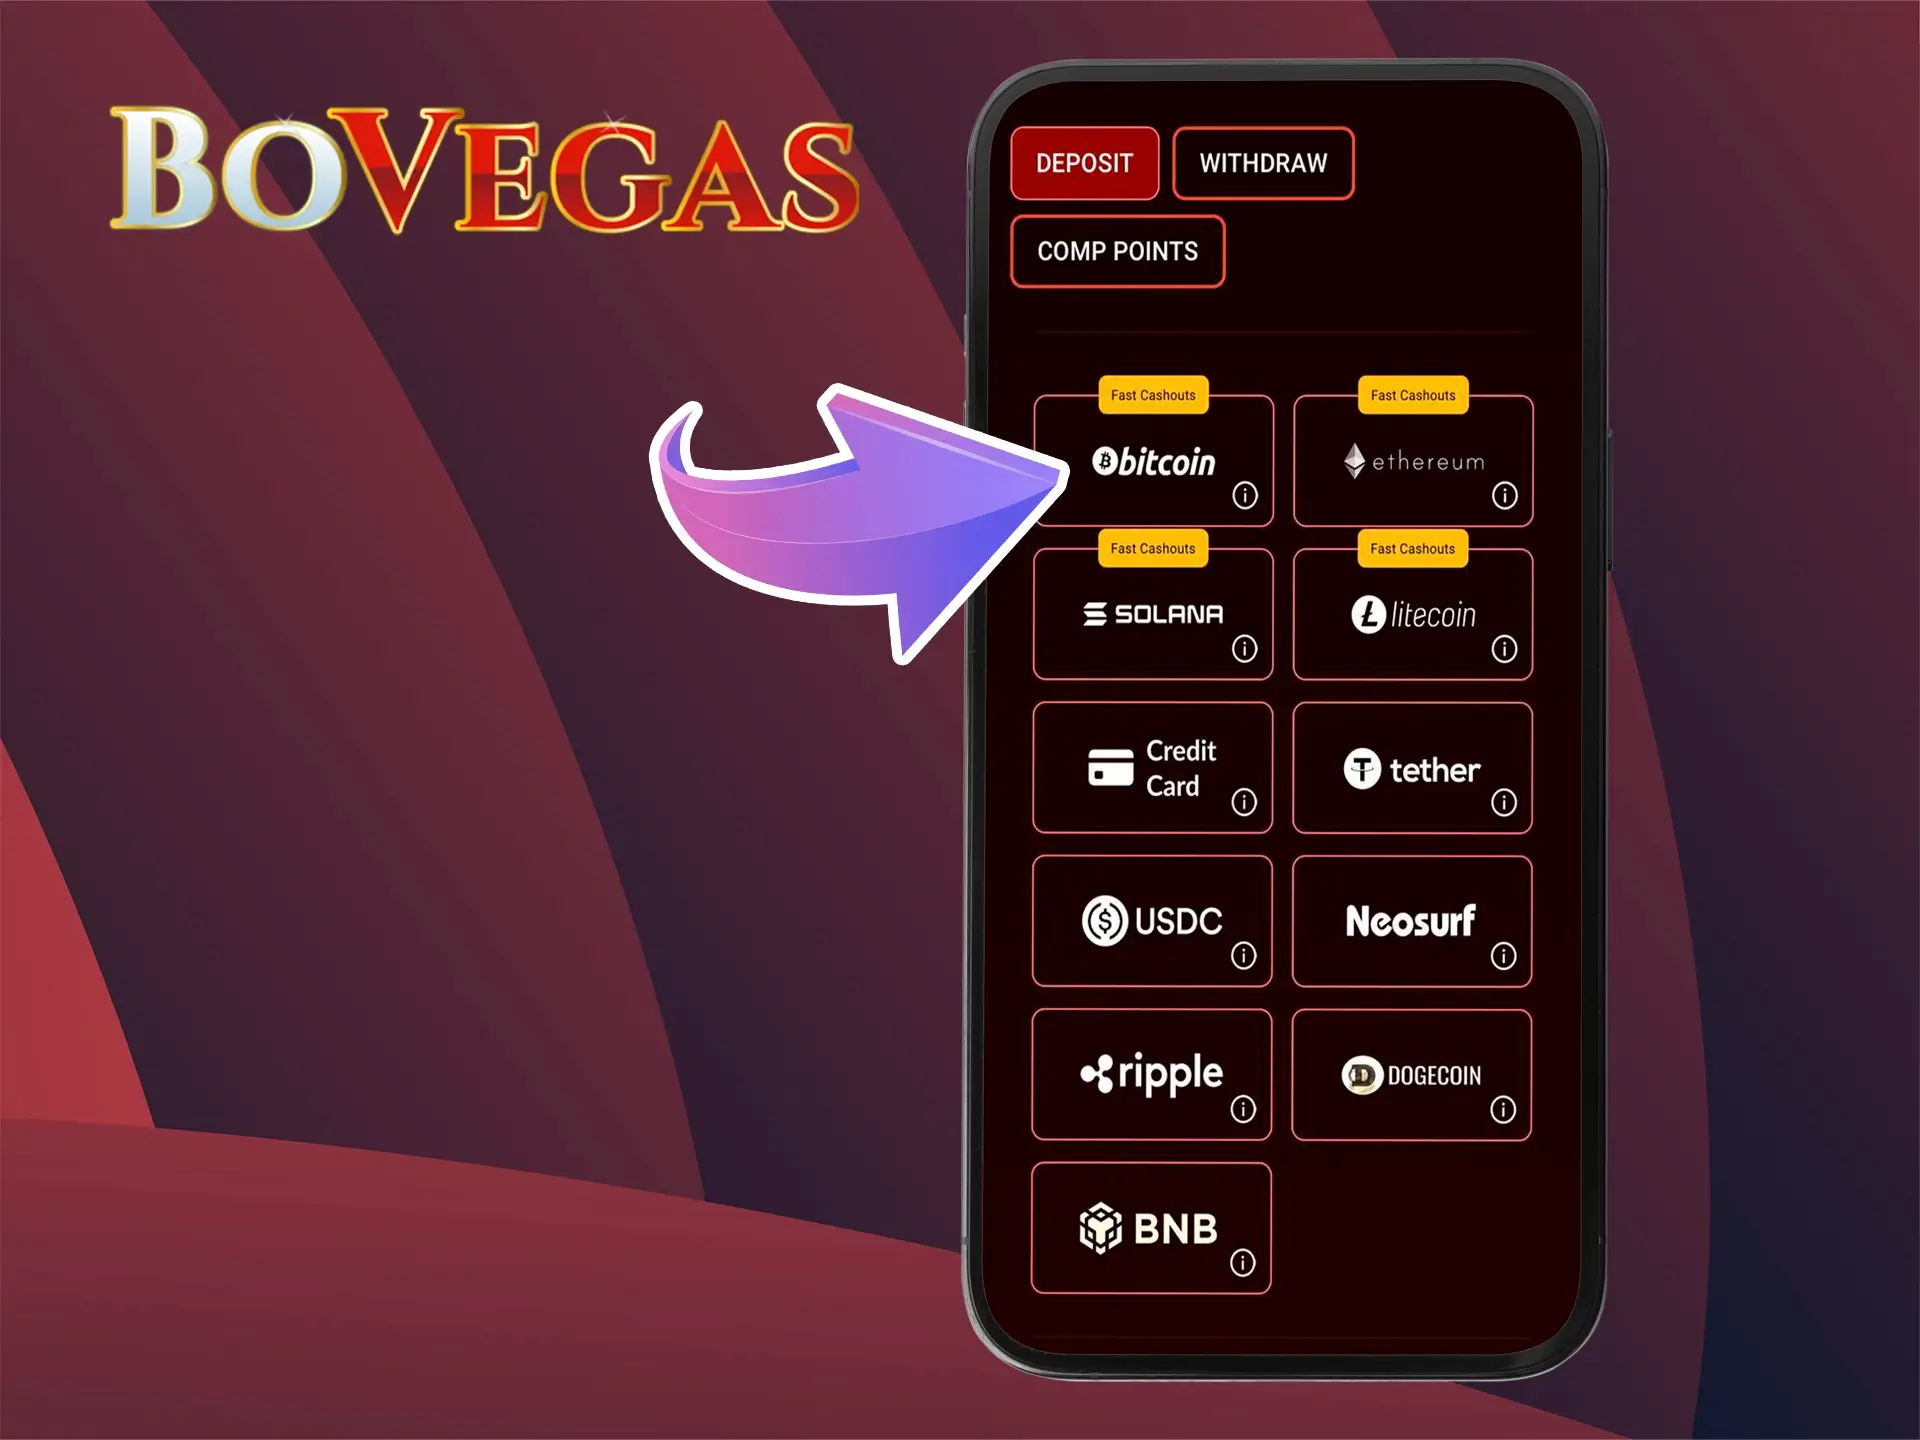 Determine a convenient and favourable method for you to deposit to your account at BoVegas Casino.